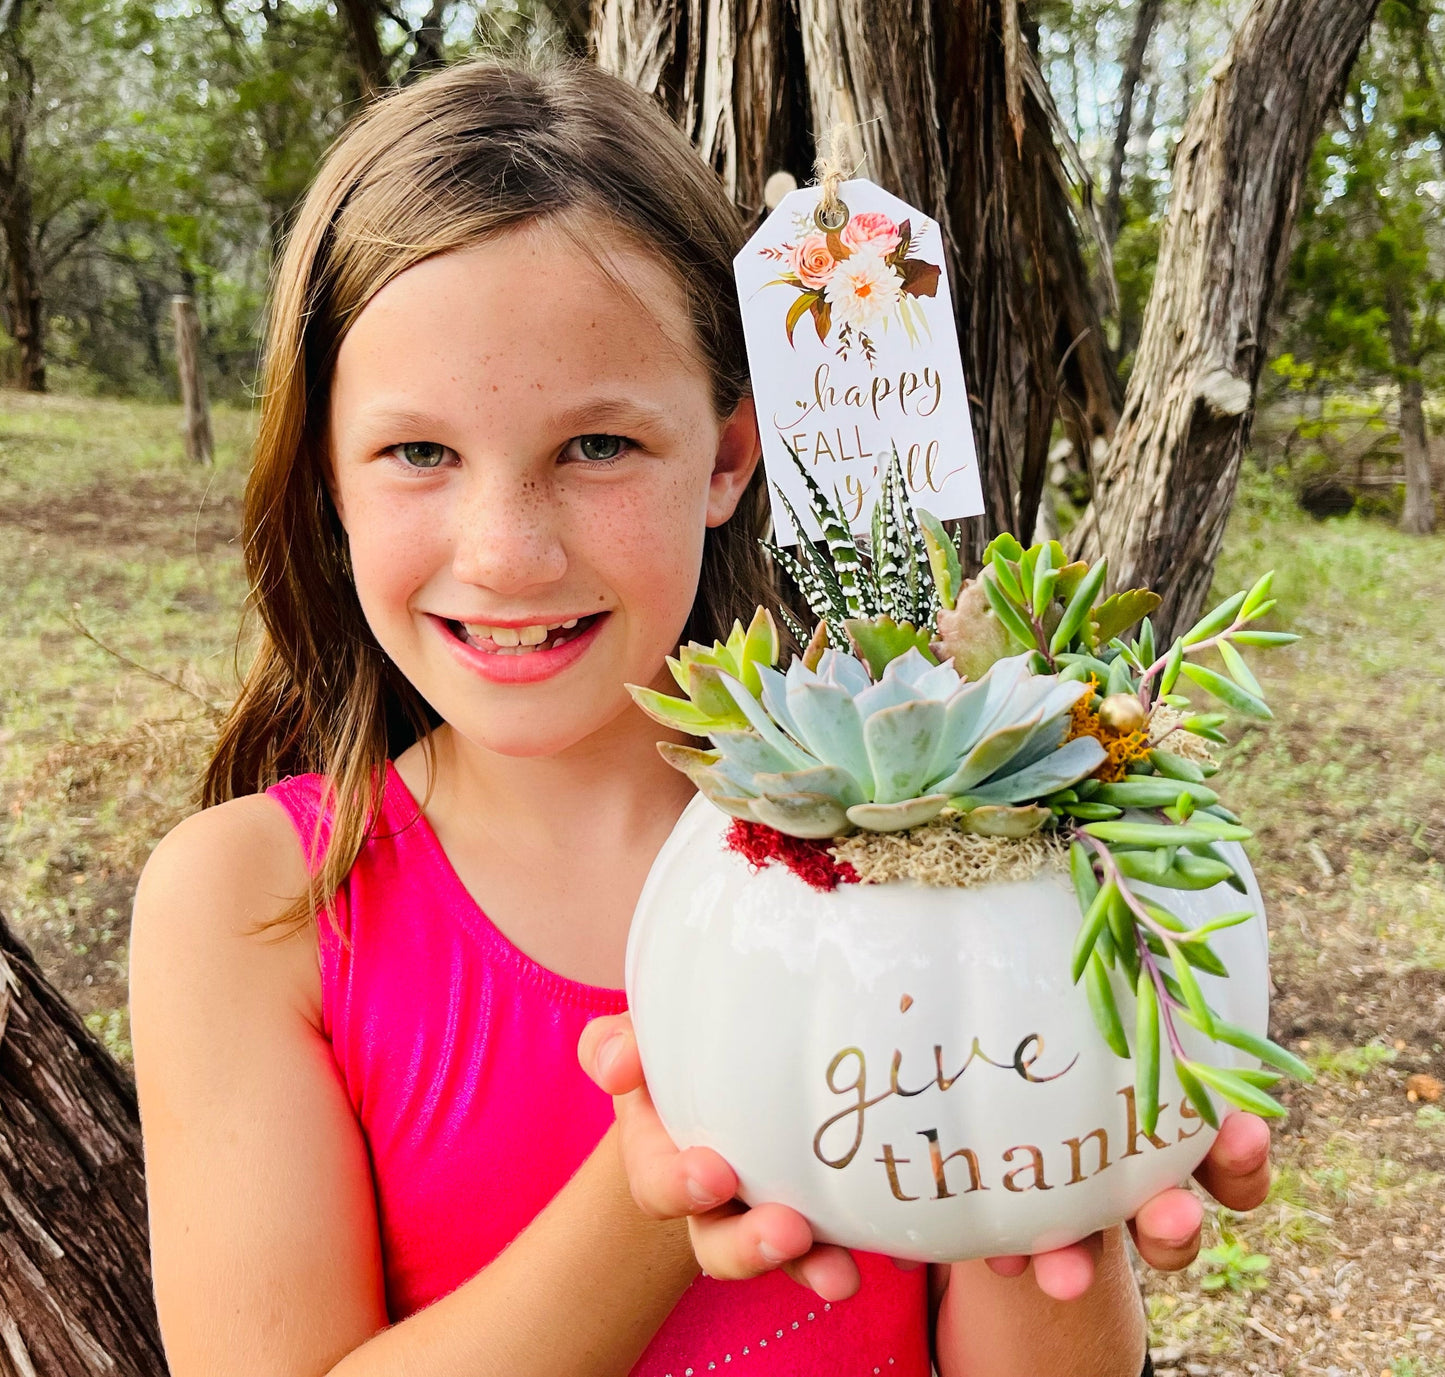 Give Thanks Pumpkin Succulent | Rooted Treasures Succulents